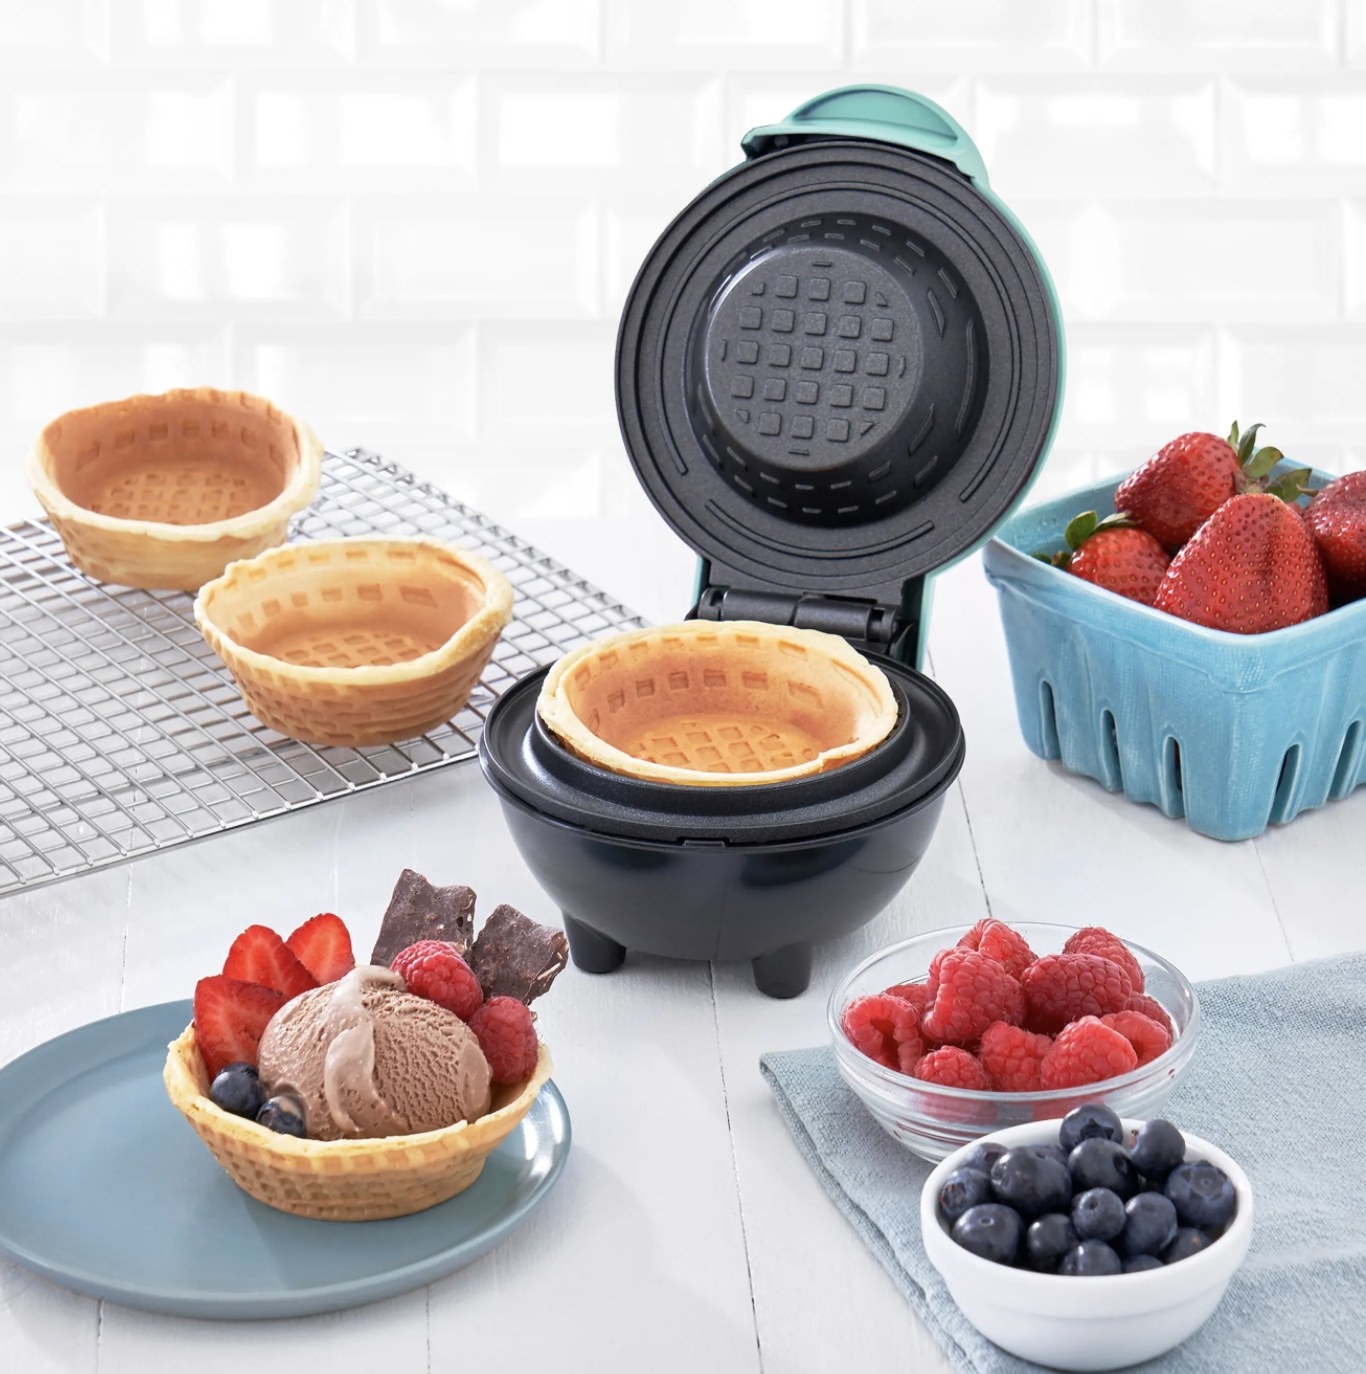 The waffle maker